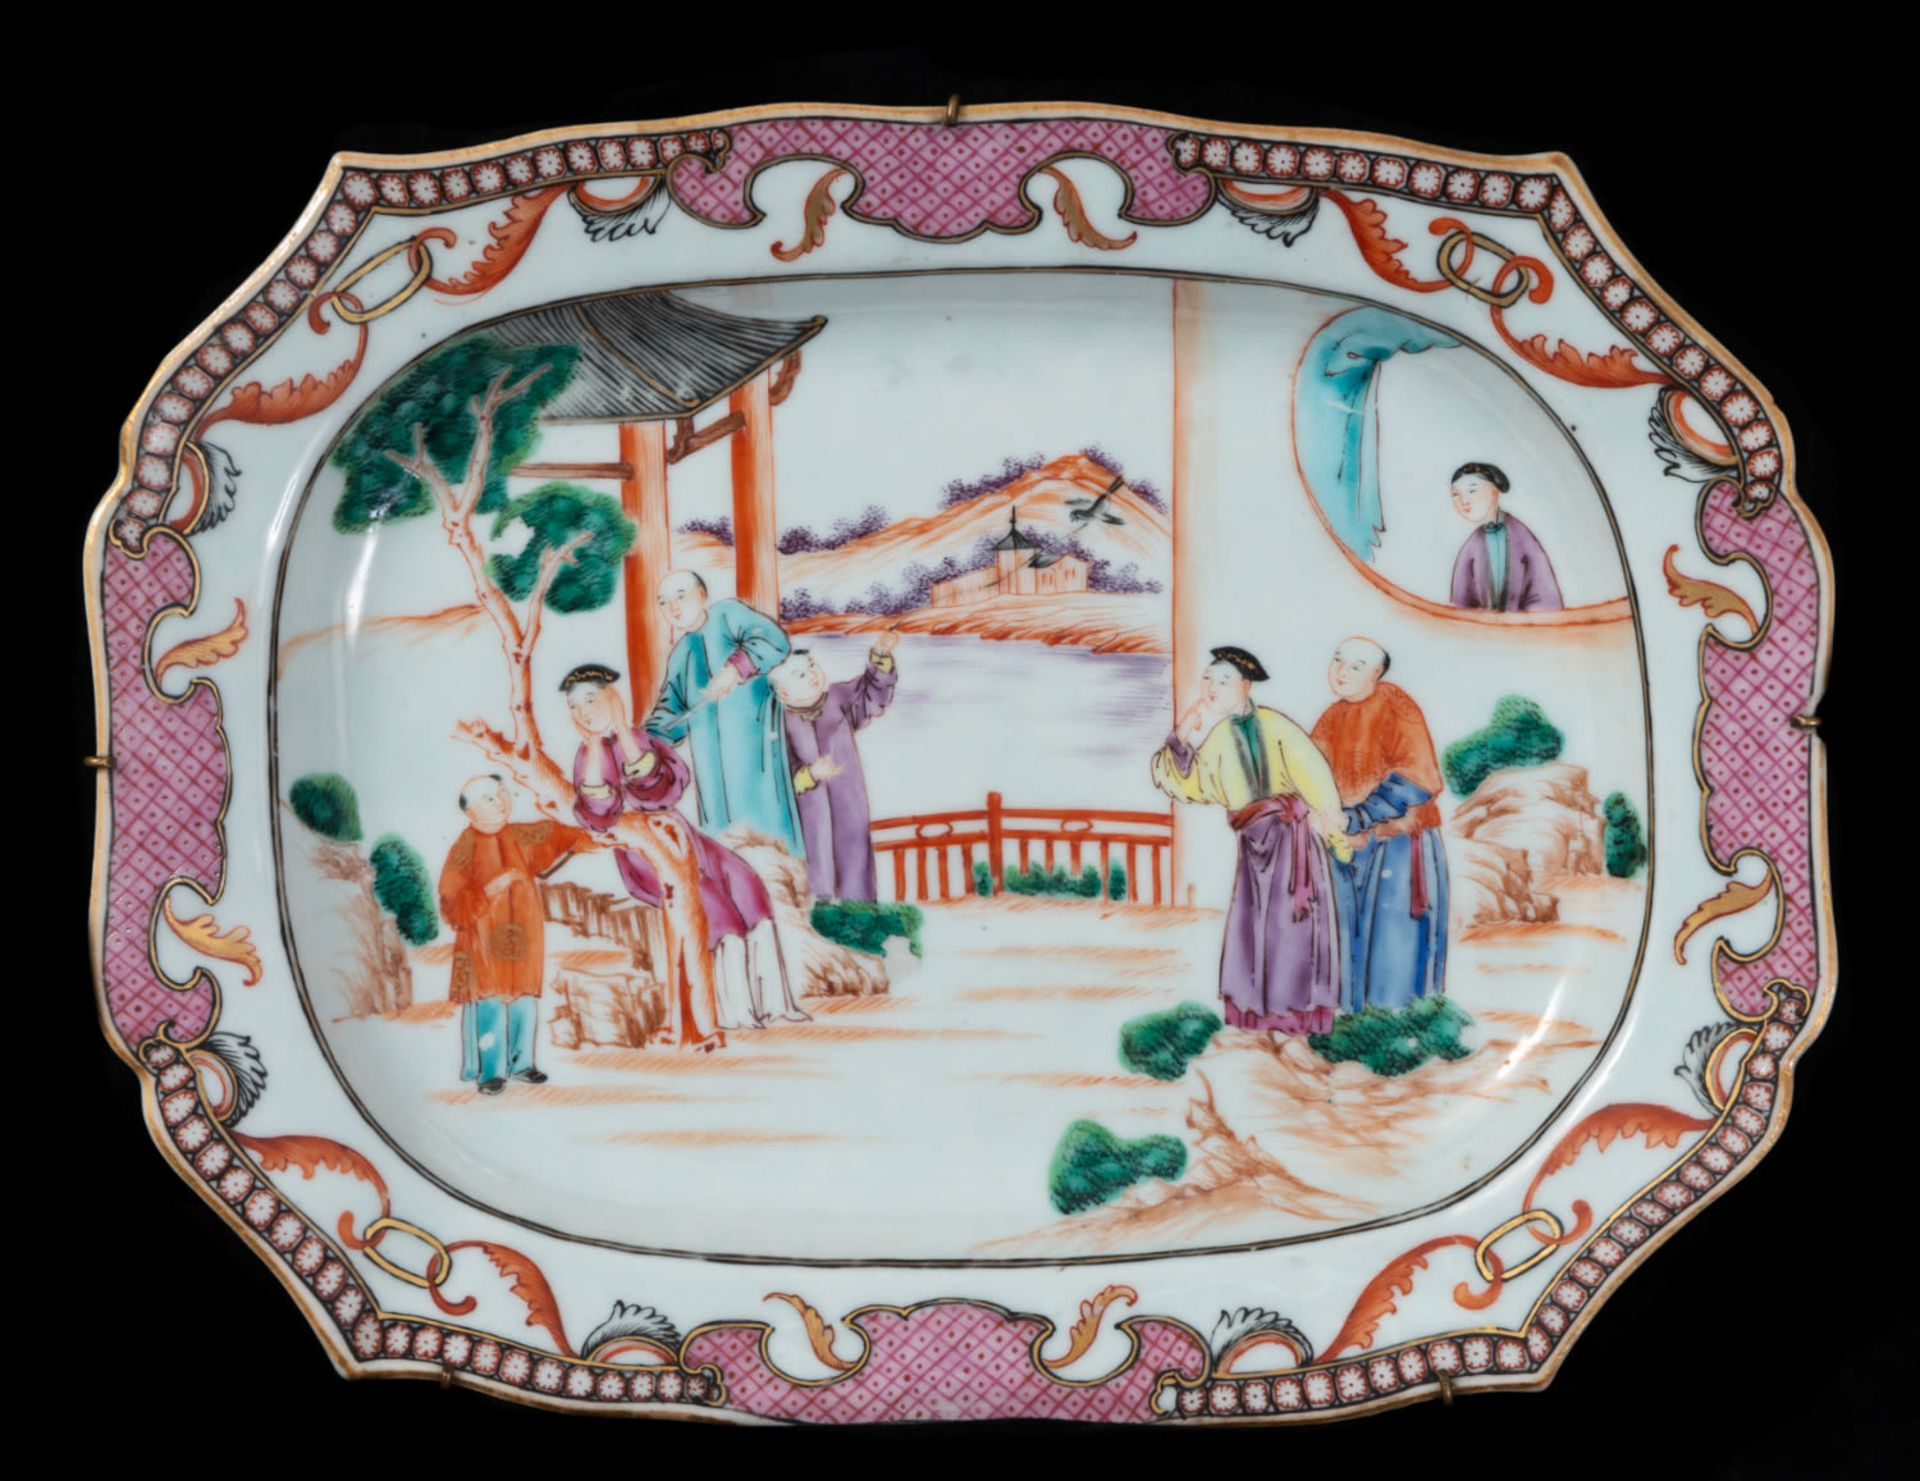 Tray with Chinese characters from the Rosa series, 18th century